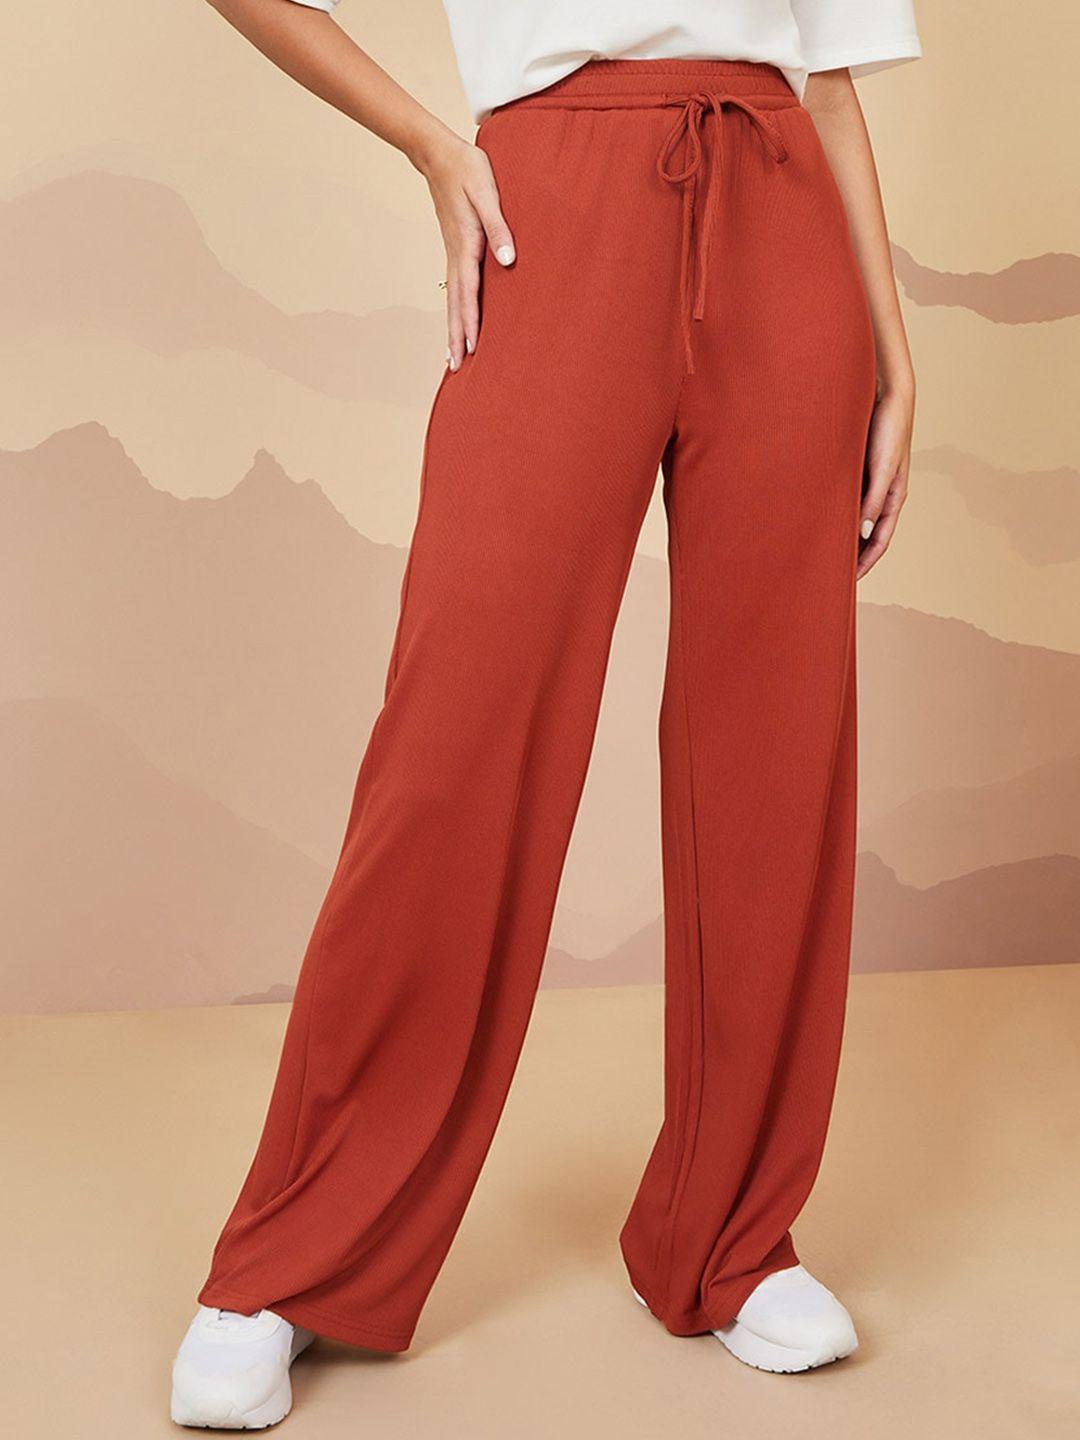 styli-women-flared-high-rise-parallel-trousers